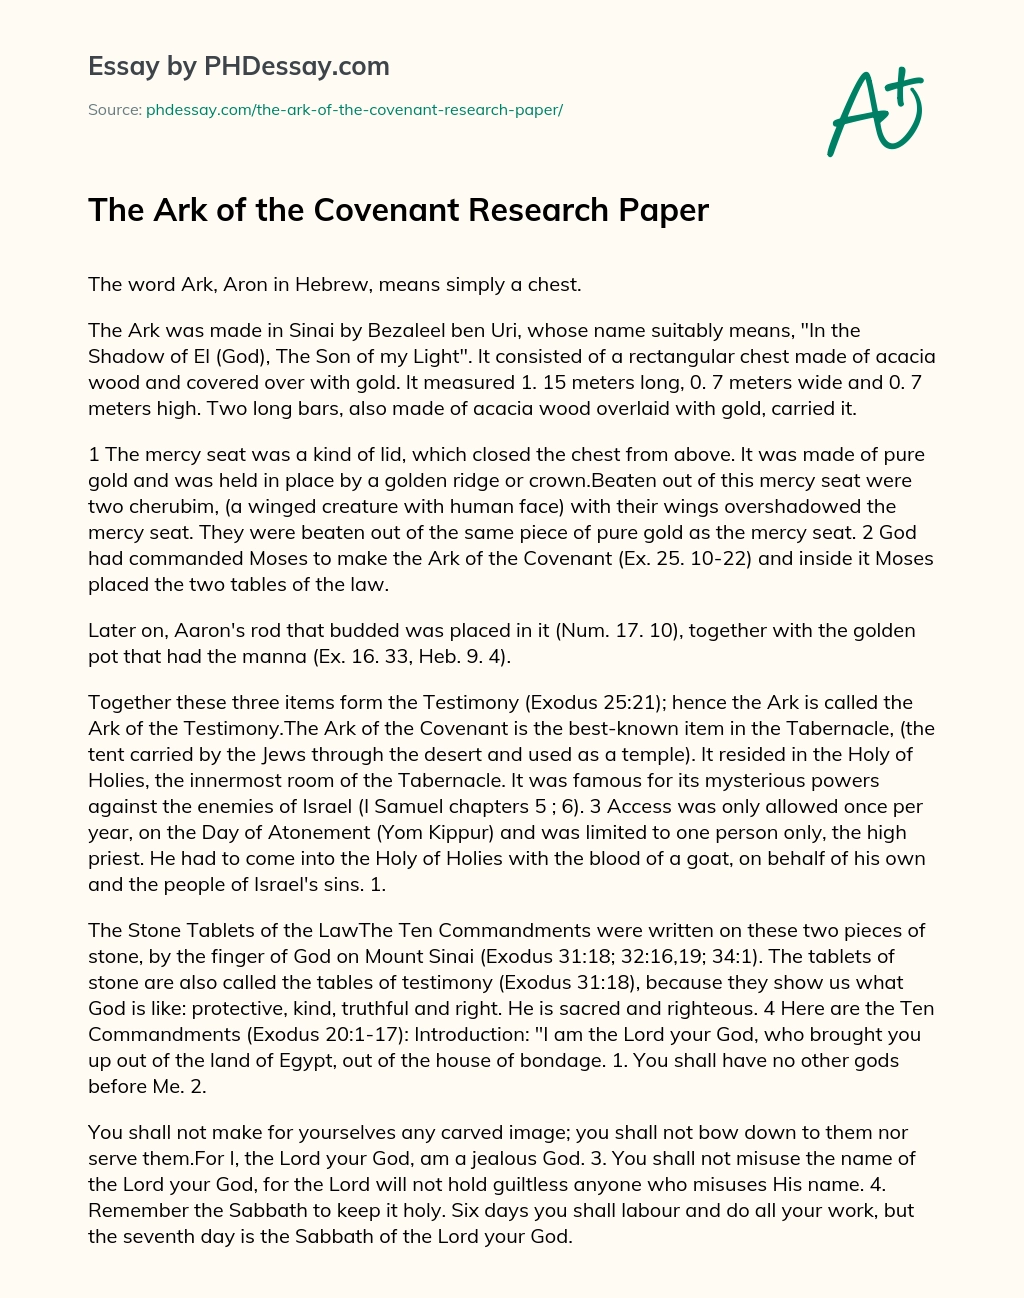 The Ark of the Covenant Research Paper essay